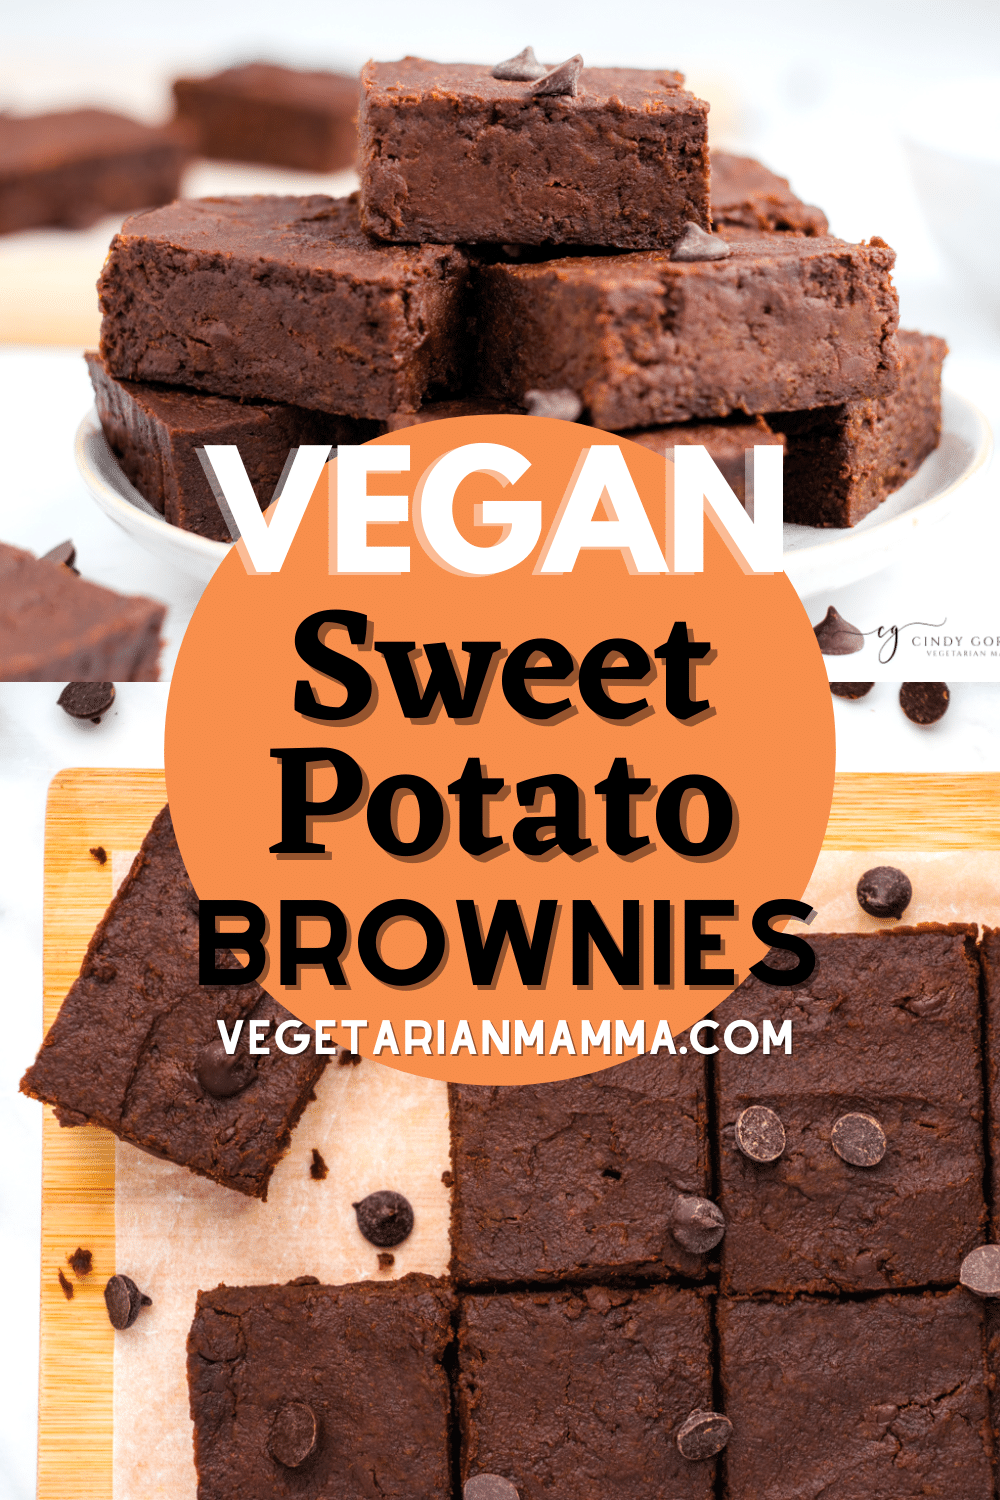 Sweet Potato Brownies are chocolatey, moist, and totally vegan! This decadent dessert recipe is so easy to make and packed with natural ingredients and tons of chocolate chips.